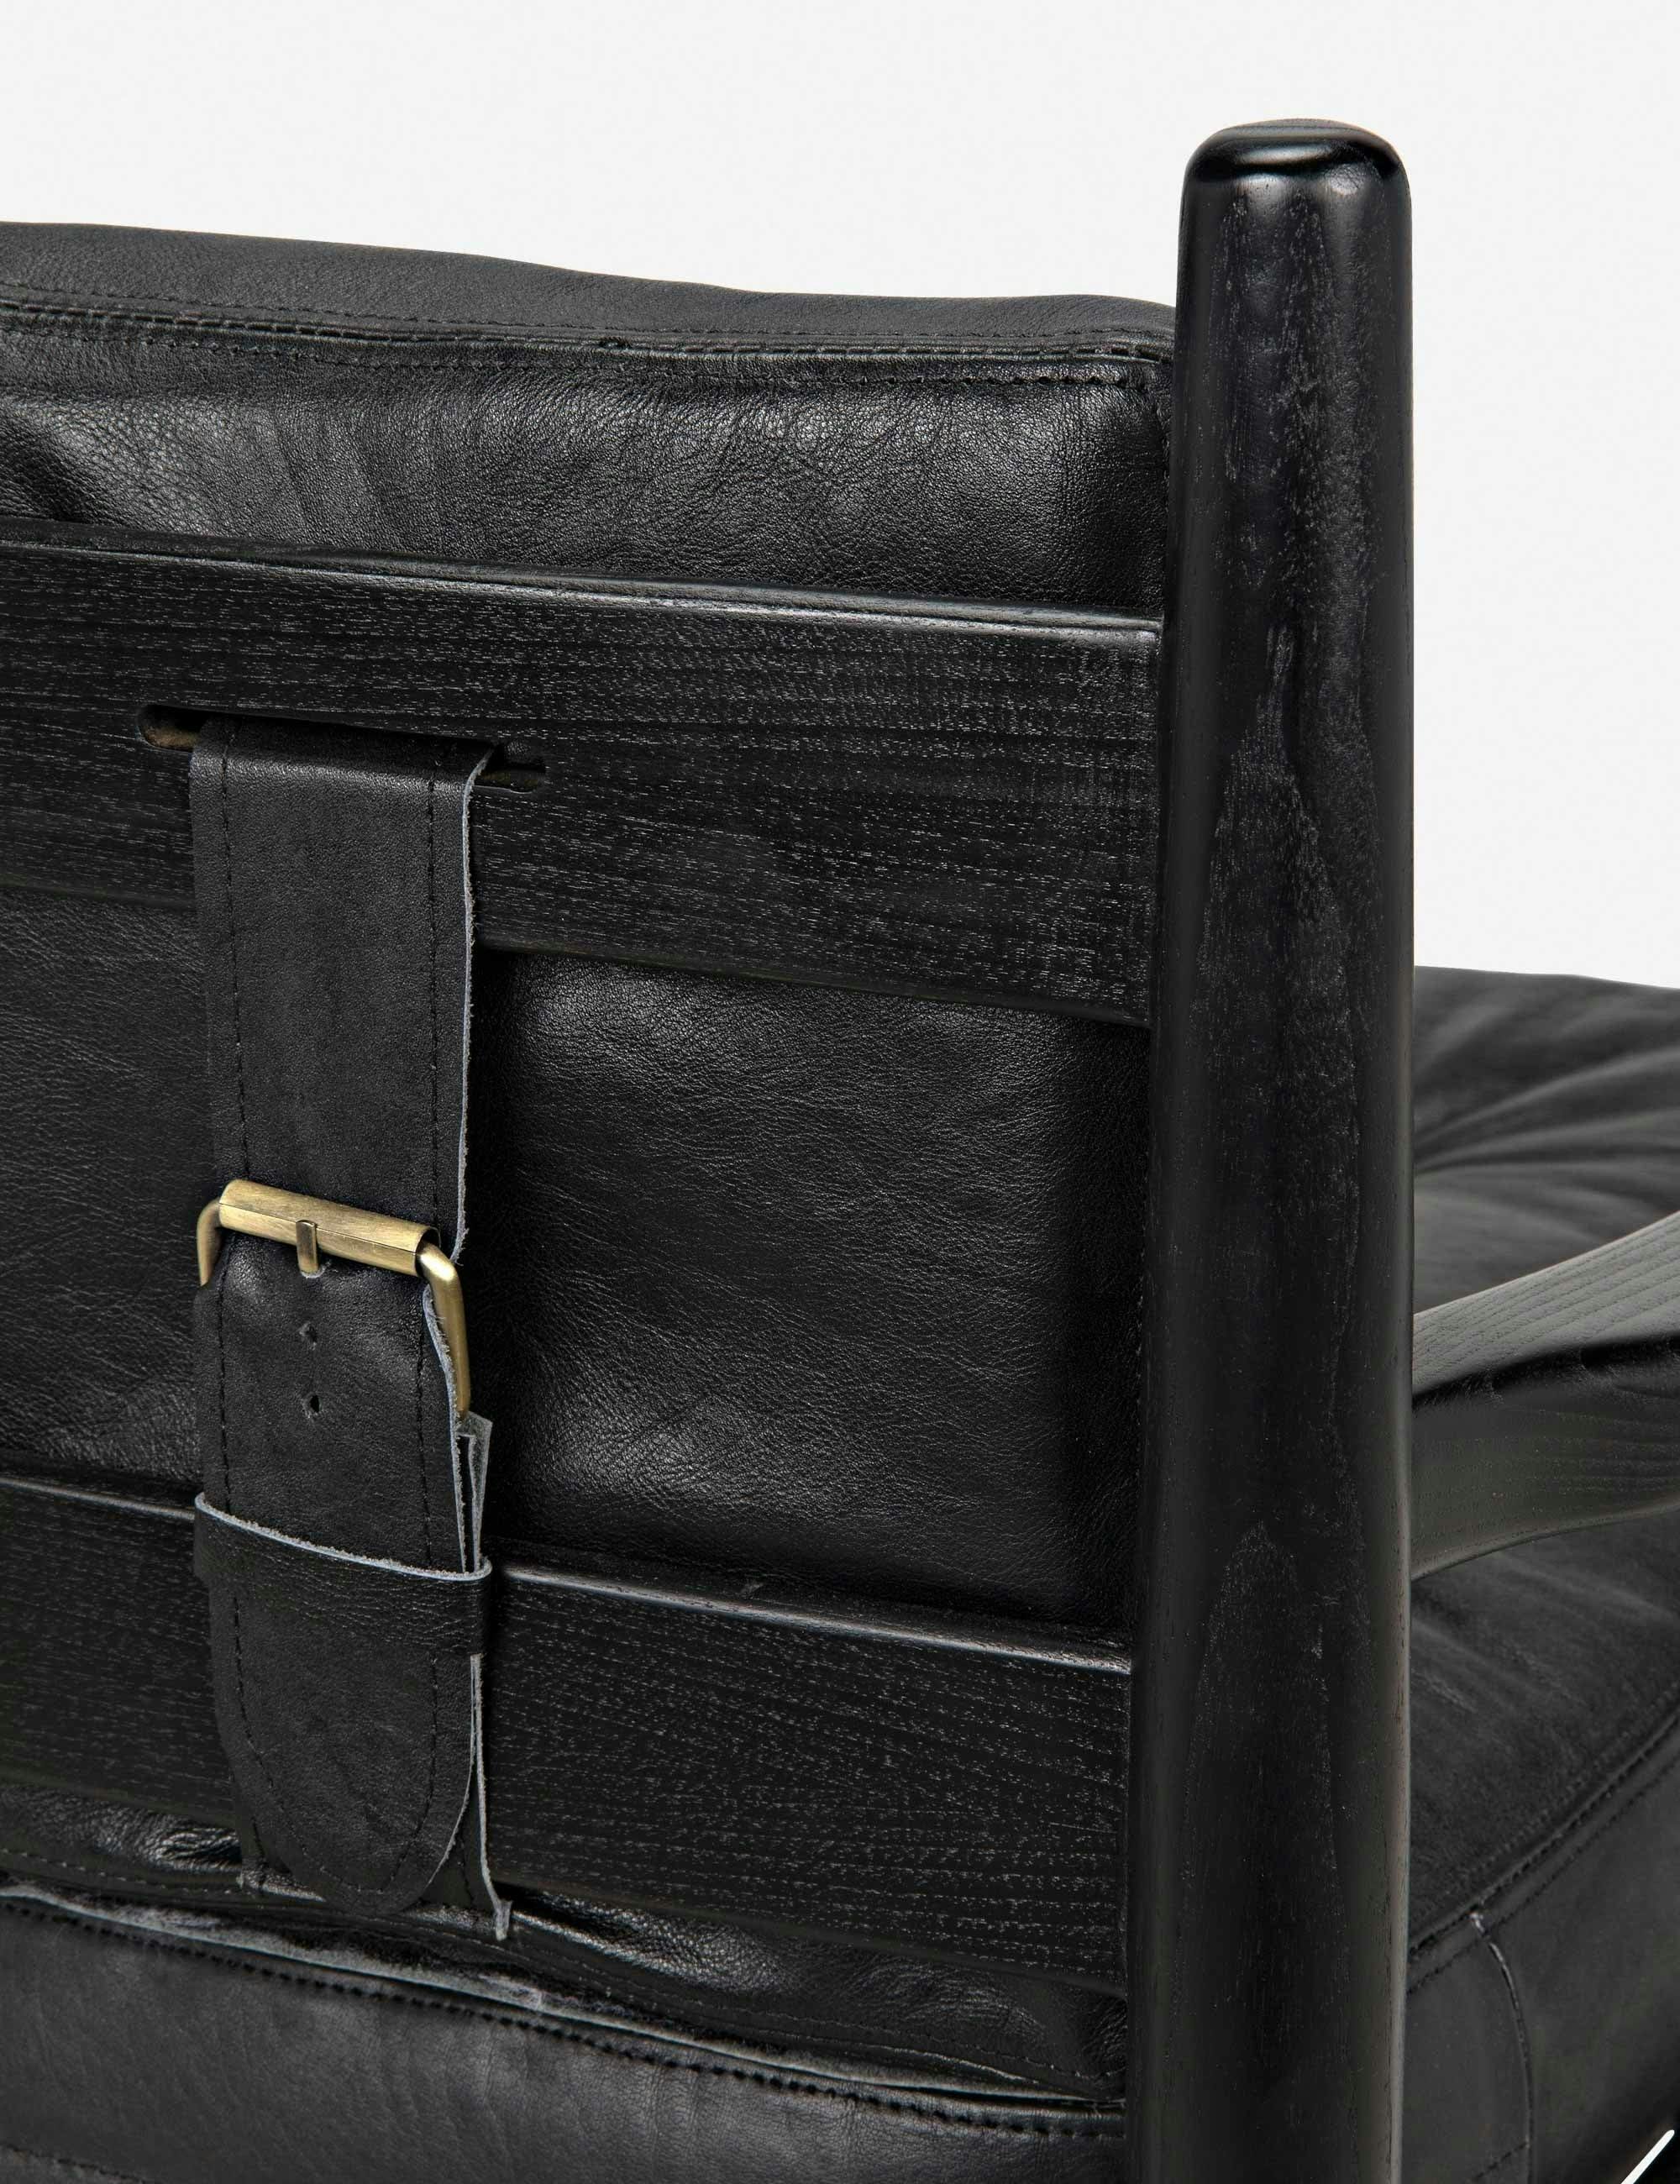 Kady Noir Handcrafted Black Leather Lounge Chair with Sungkai Wood Base